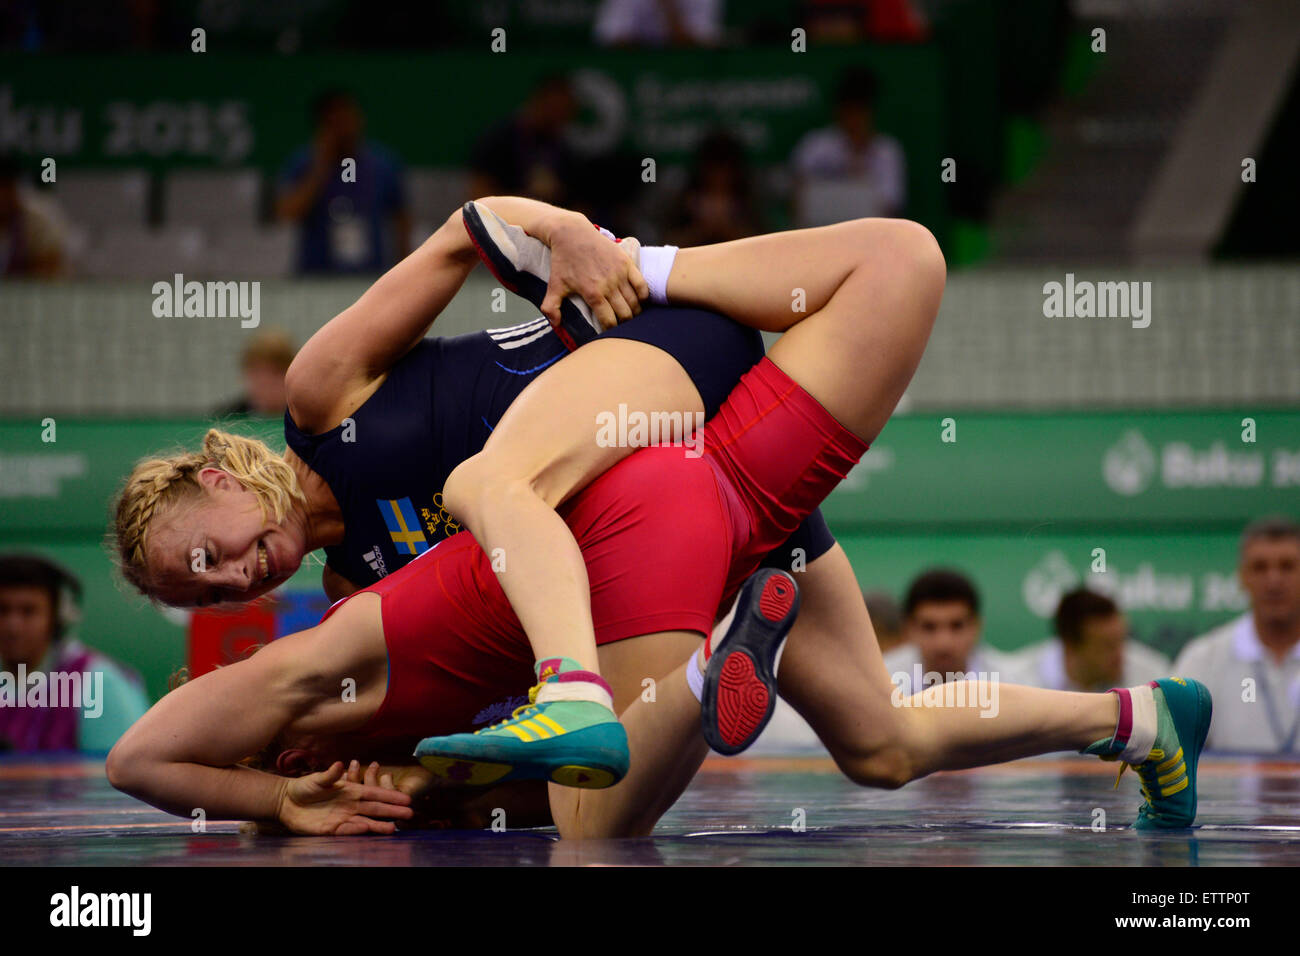 Baku. 15th June, 2015. Mattson Sofia (above) of Sweden competes in the final of women's 55kg wrestling event at the European Games in Azerbaijan's capital of Baku on June 15, 2015. Mattson Sofia won the gold medal. Credit:  Tofik Babayev/Xinhua/Alamy Live News Stock Photo